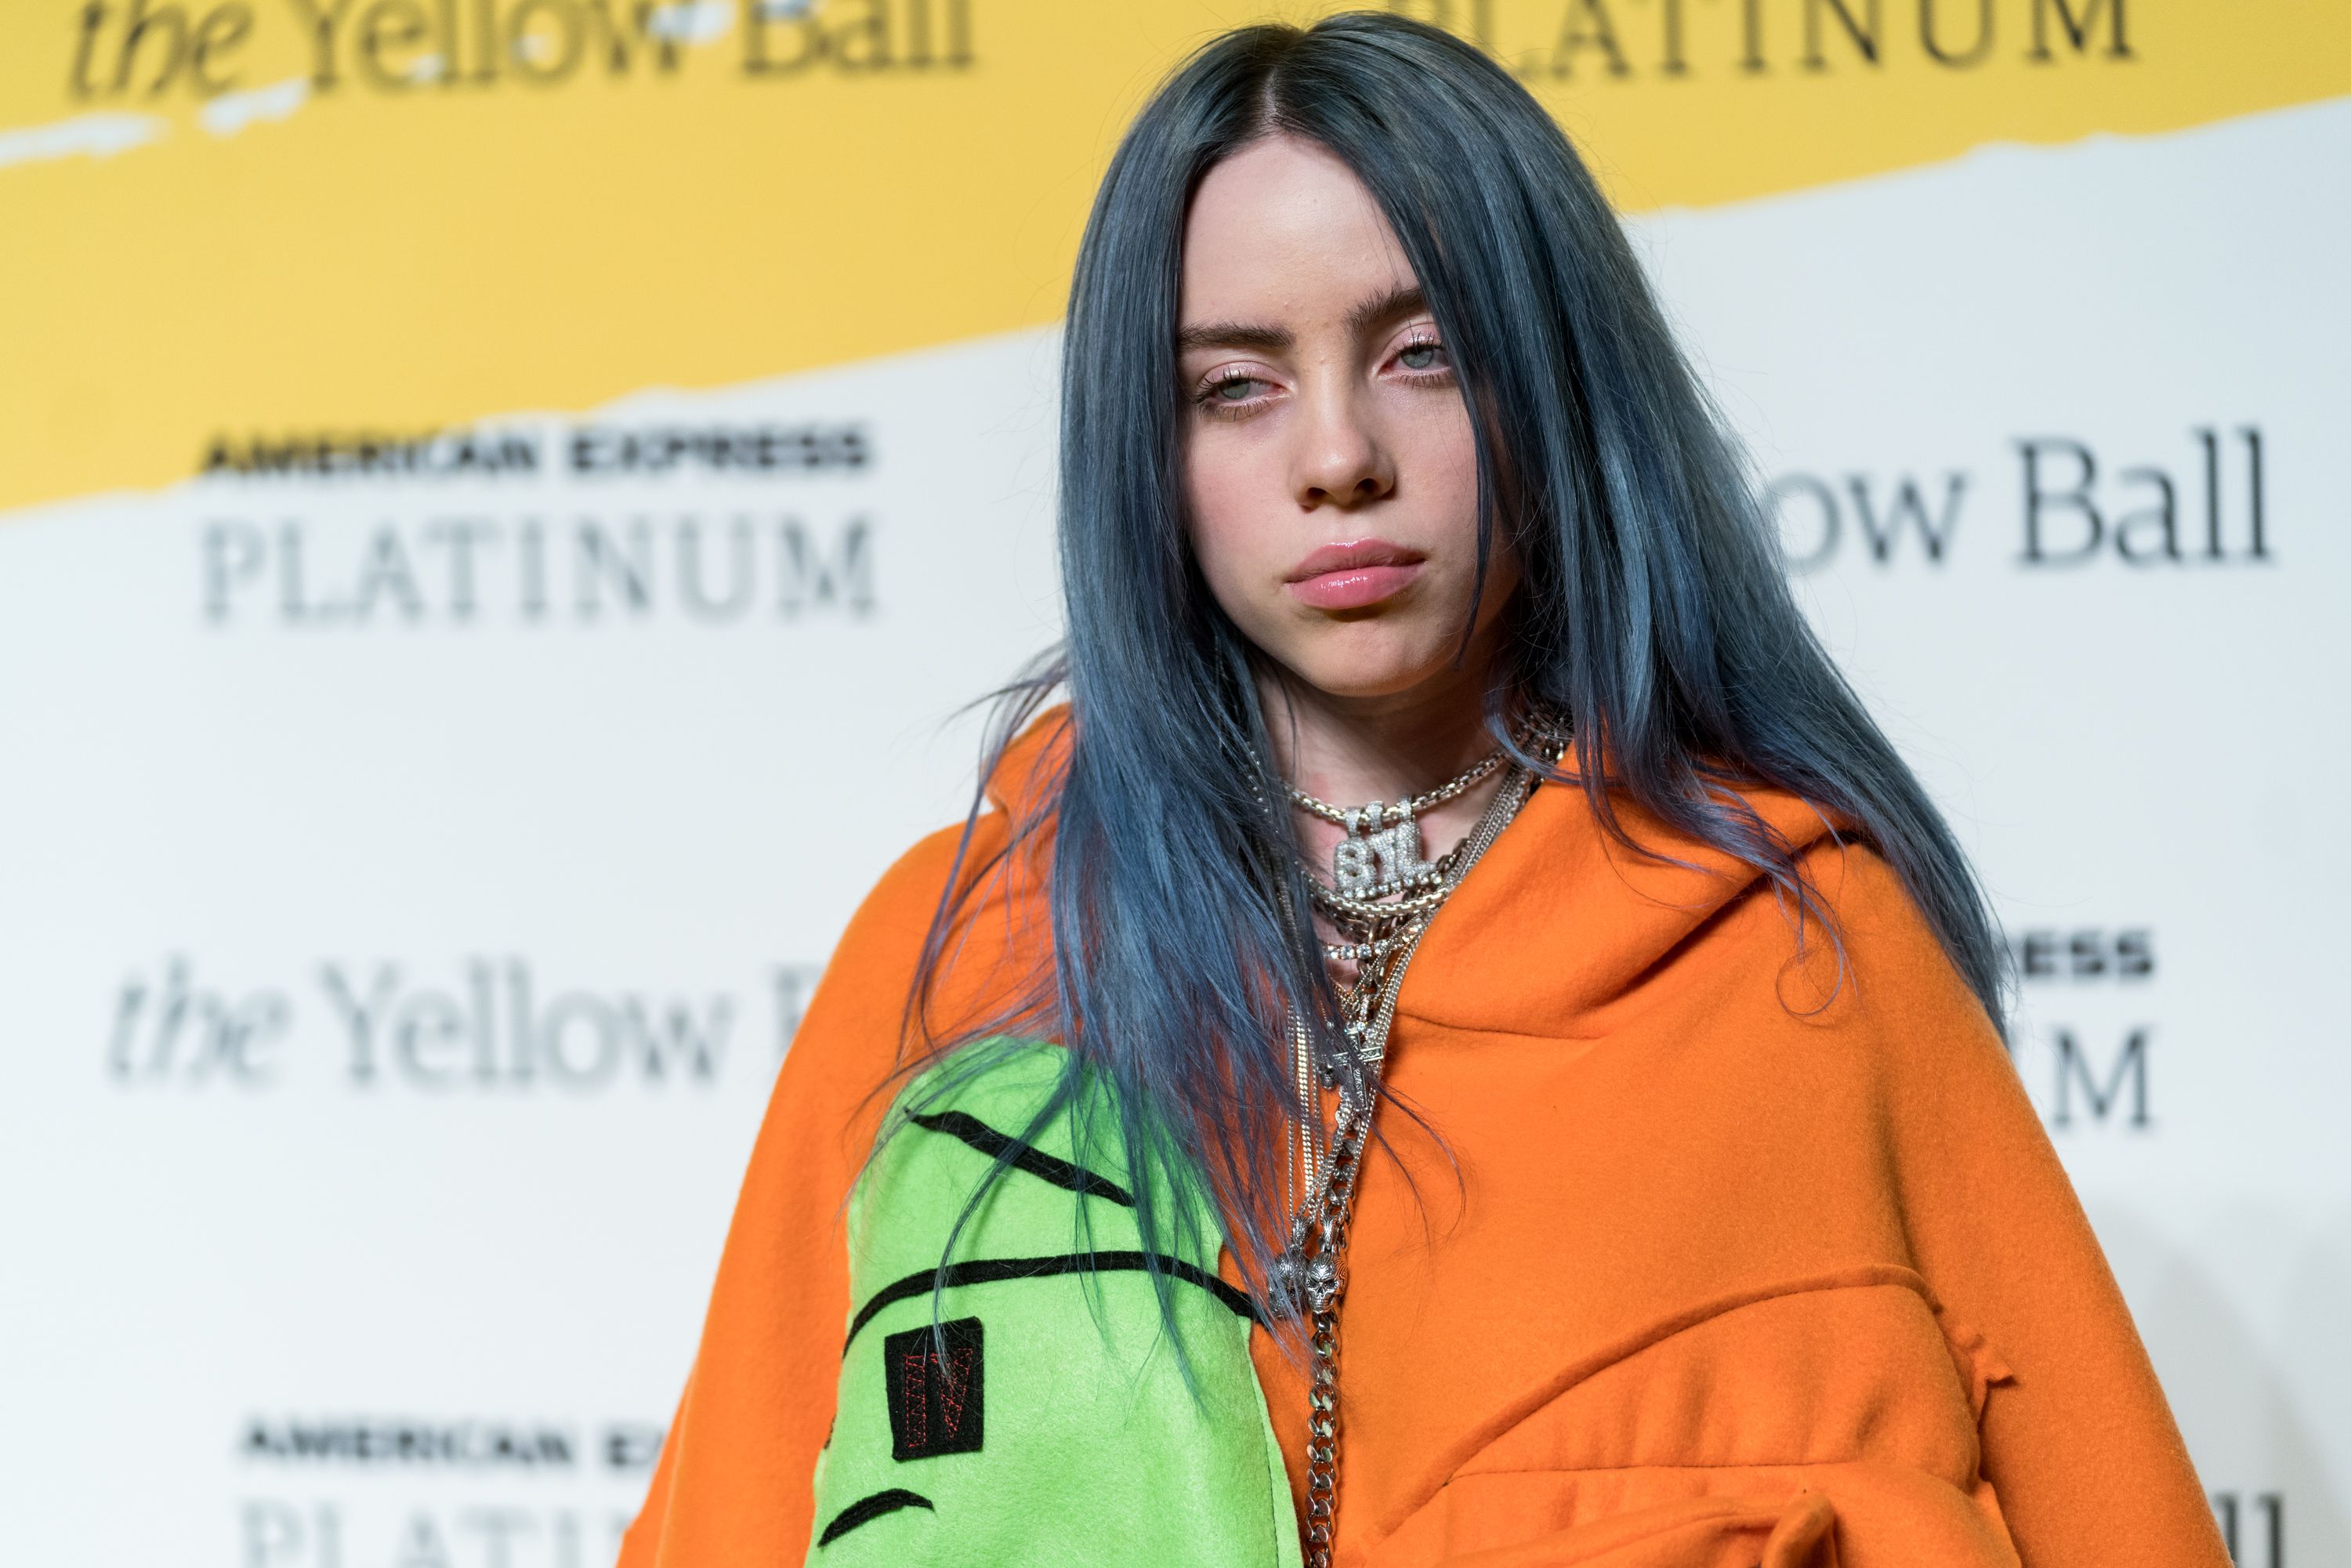 Billie eilish nude cover Billie Eilish Slams Nylon For Topless Robot Cover Published Without Consent